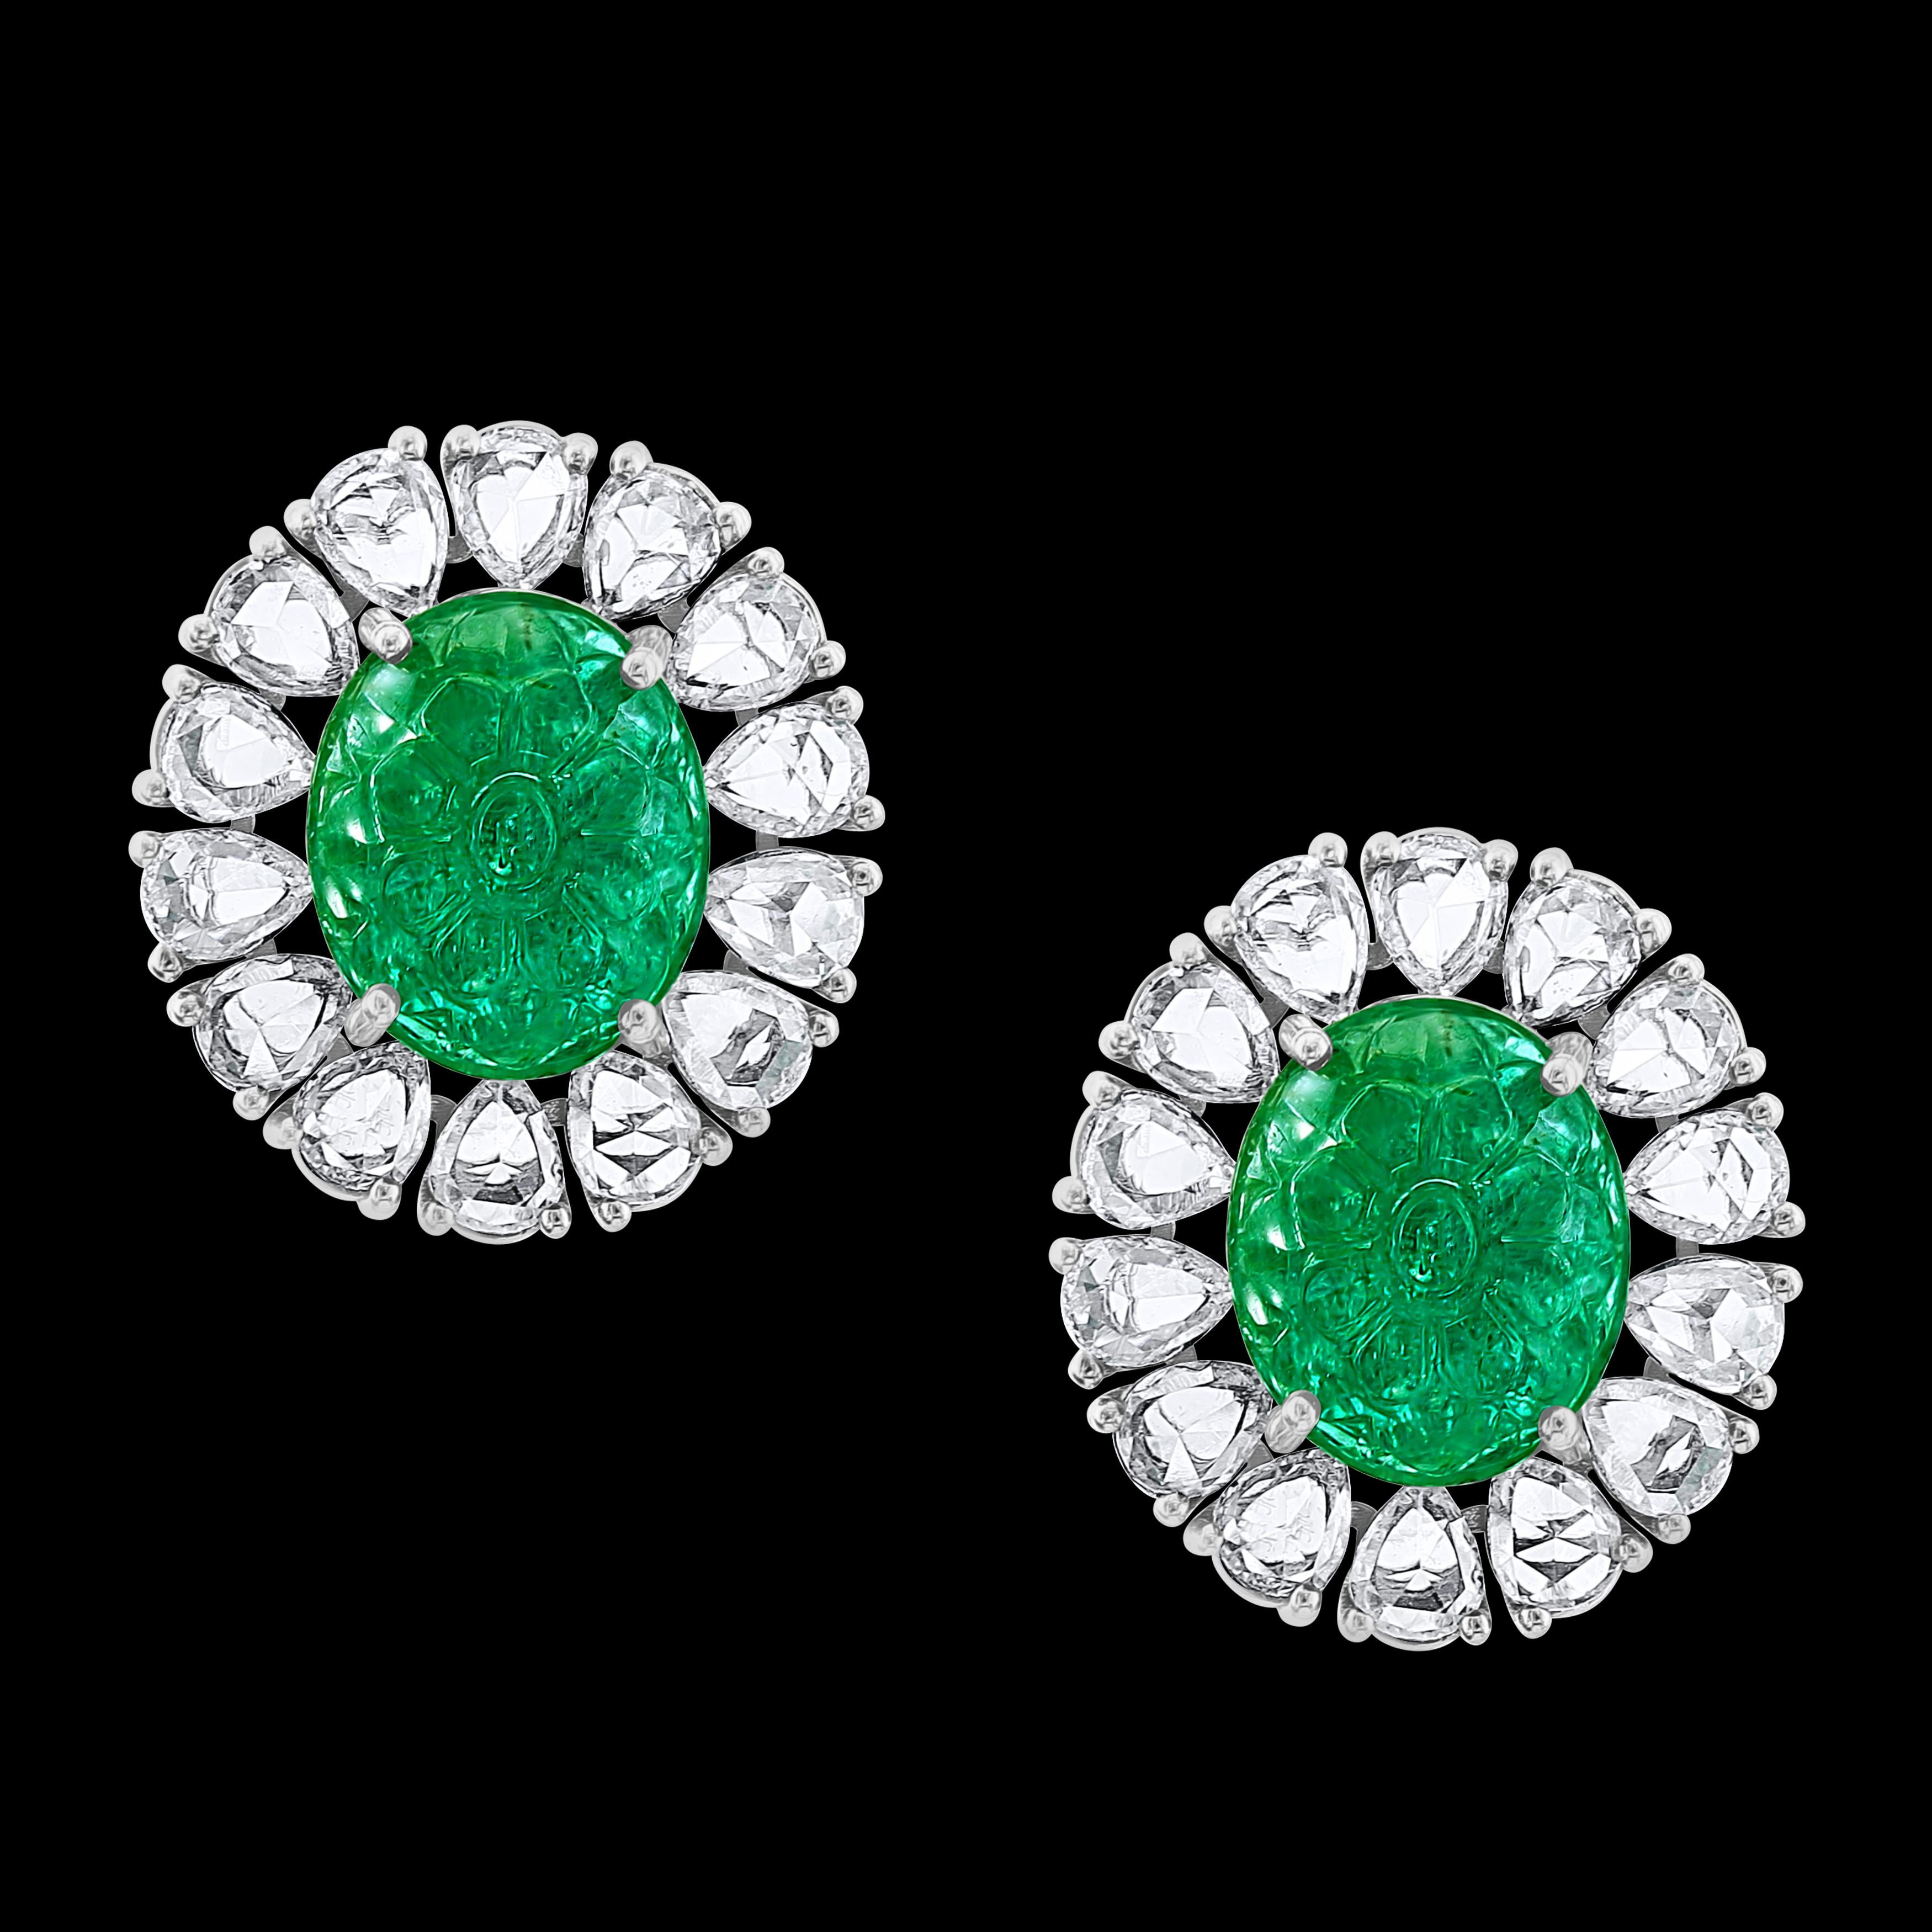 7.23 Ct Carved Emerald  &  2.9 Ct Rose cut Diamond Earrings 18 Karat White Gold

 Emerald  Diamond  Post  Earrings  18 Karat  white Gold 
Two fine carved emeralds of total 7.23 ct weight
Emeralds are surrounded by pear shape rose cut diamonds 
Total